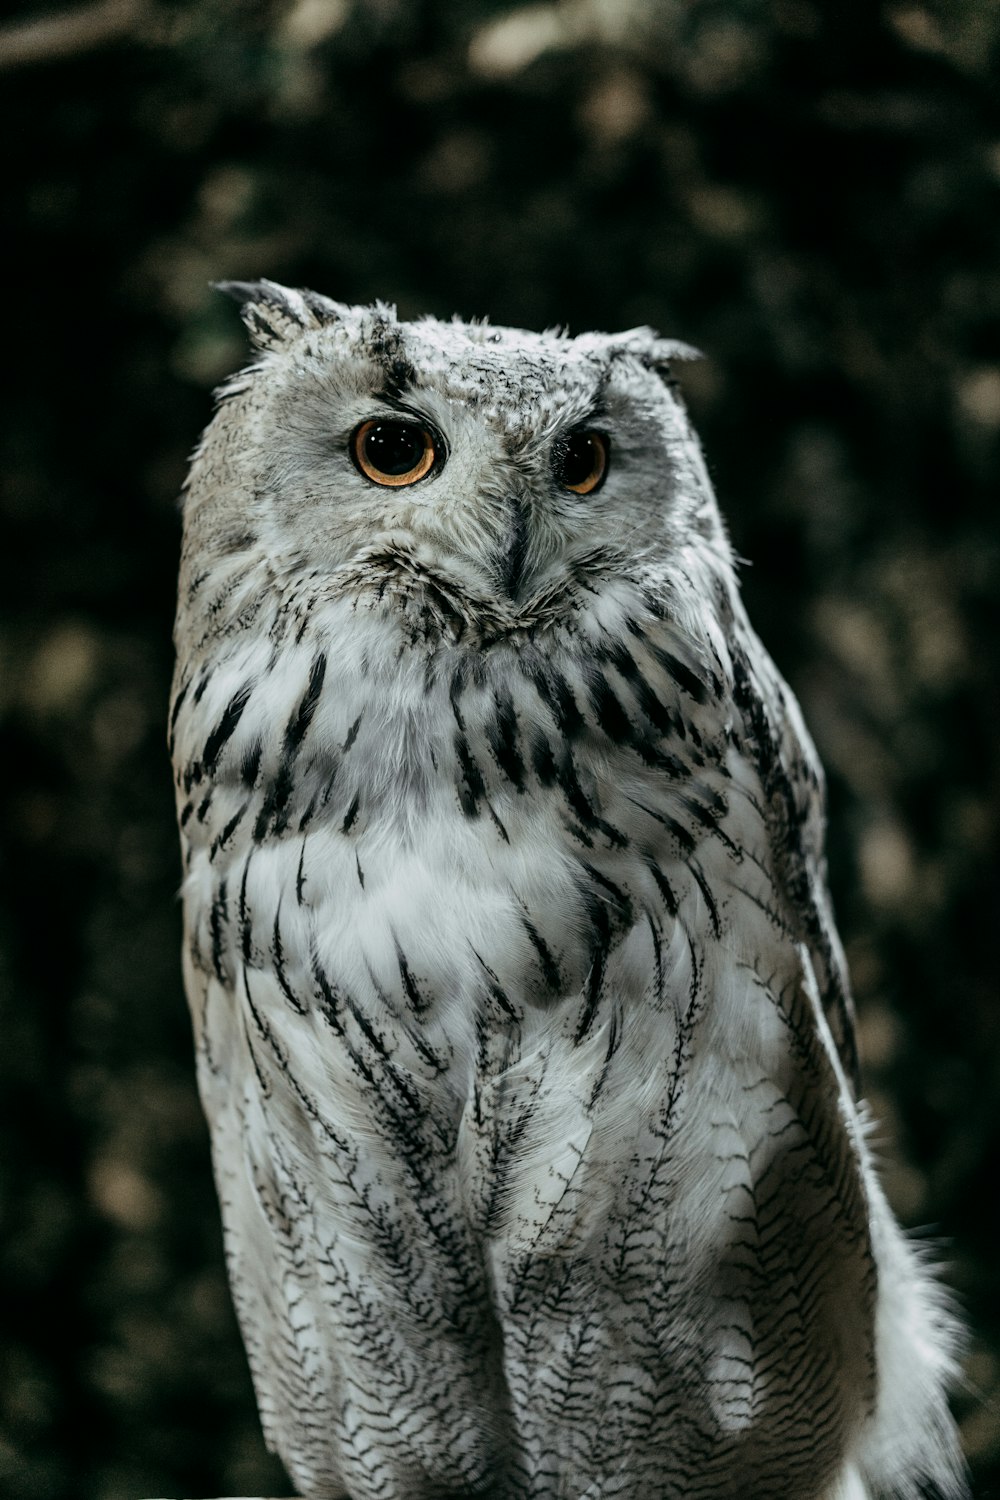 a close up of an owl sitting on a rock